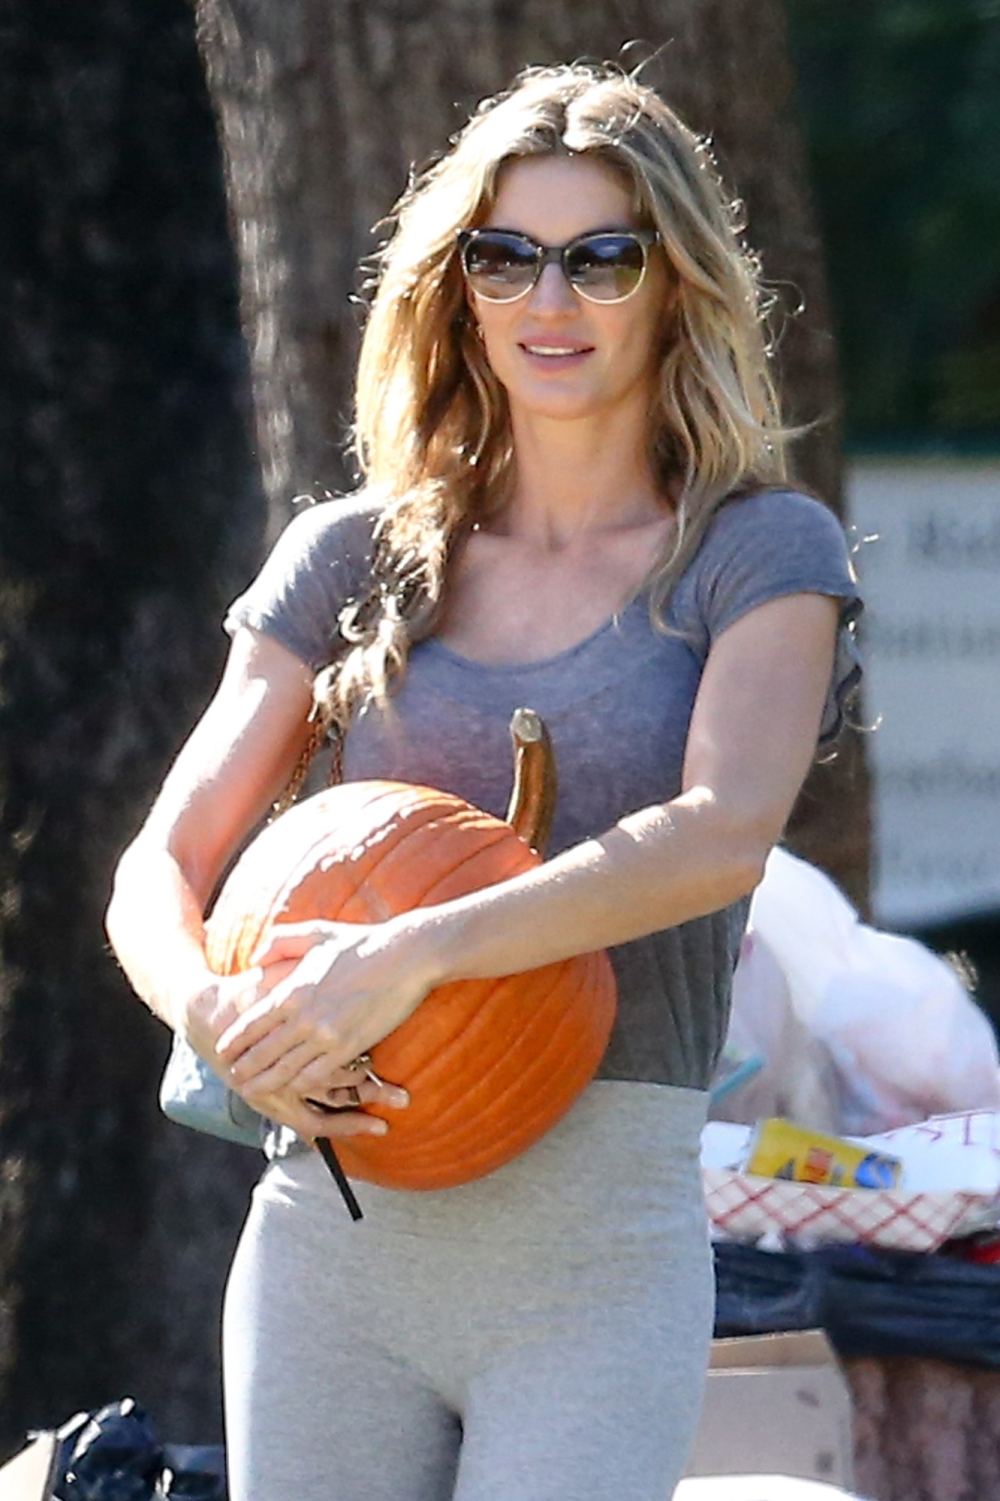 Gisele Bundchen Told Tom Brady She Might Be ‘Gone for Good’ Amid Drama: 'She Is Doing It for Her Family' 086 PREMIUM EXCLUSIVE: Gisele Bundchen focuses on the kids during pumpkin patch outing after reportedly hiring top Florida divorce lawyer as Tom Brady split turns "nasty".